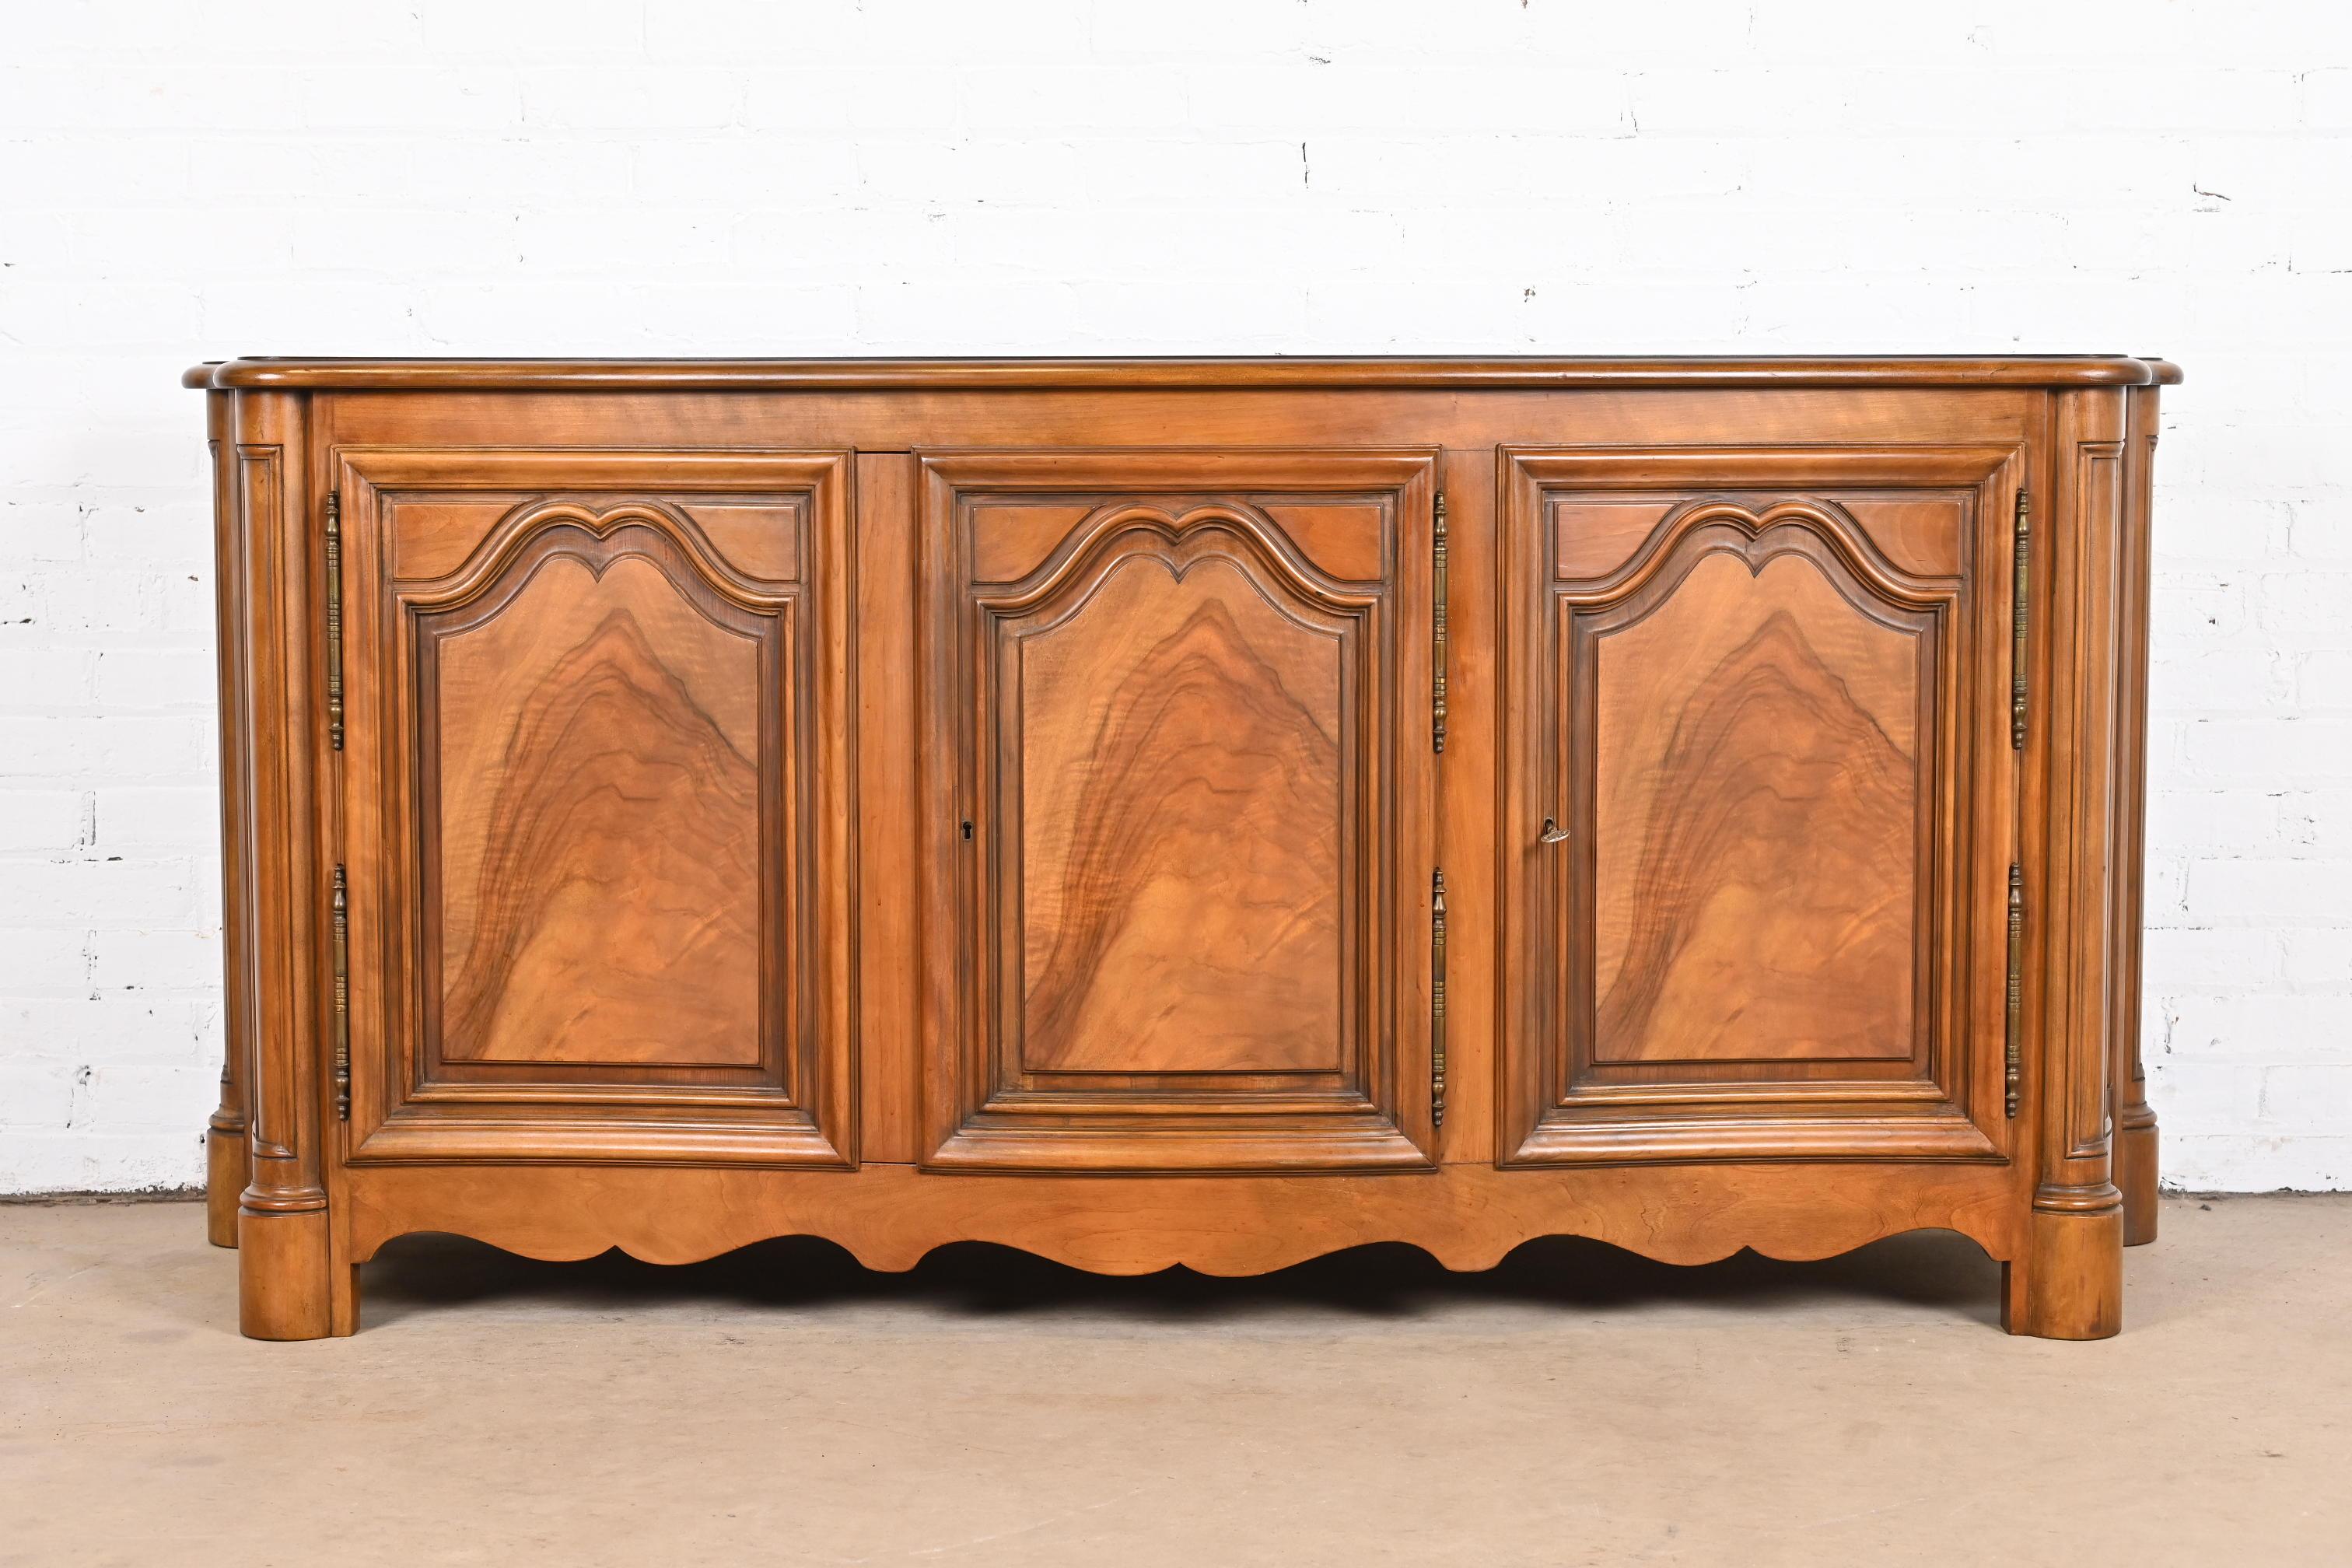 A gorgeous French Provincial or Louis Philippe style sideboard, credenza, or bar cabinet

By Baker Furniture

USA, Circa 1960s

Carved walnut, with book-matched burled walnut door fronts. Cabinets lock, and key is included.

Measures: 72